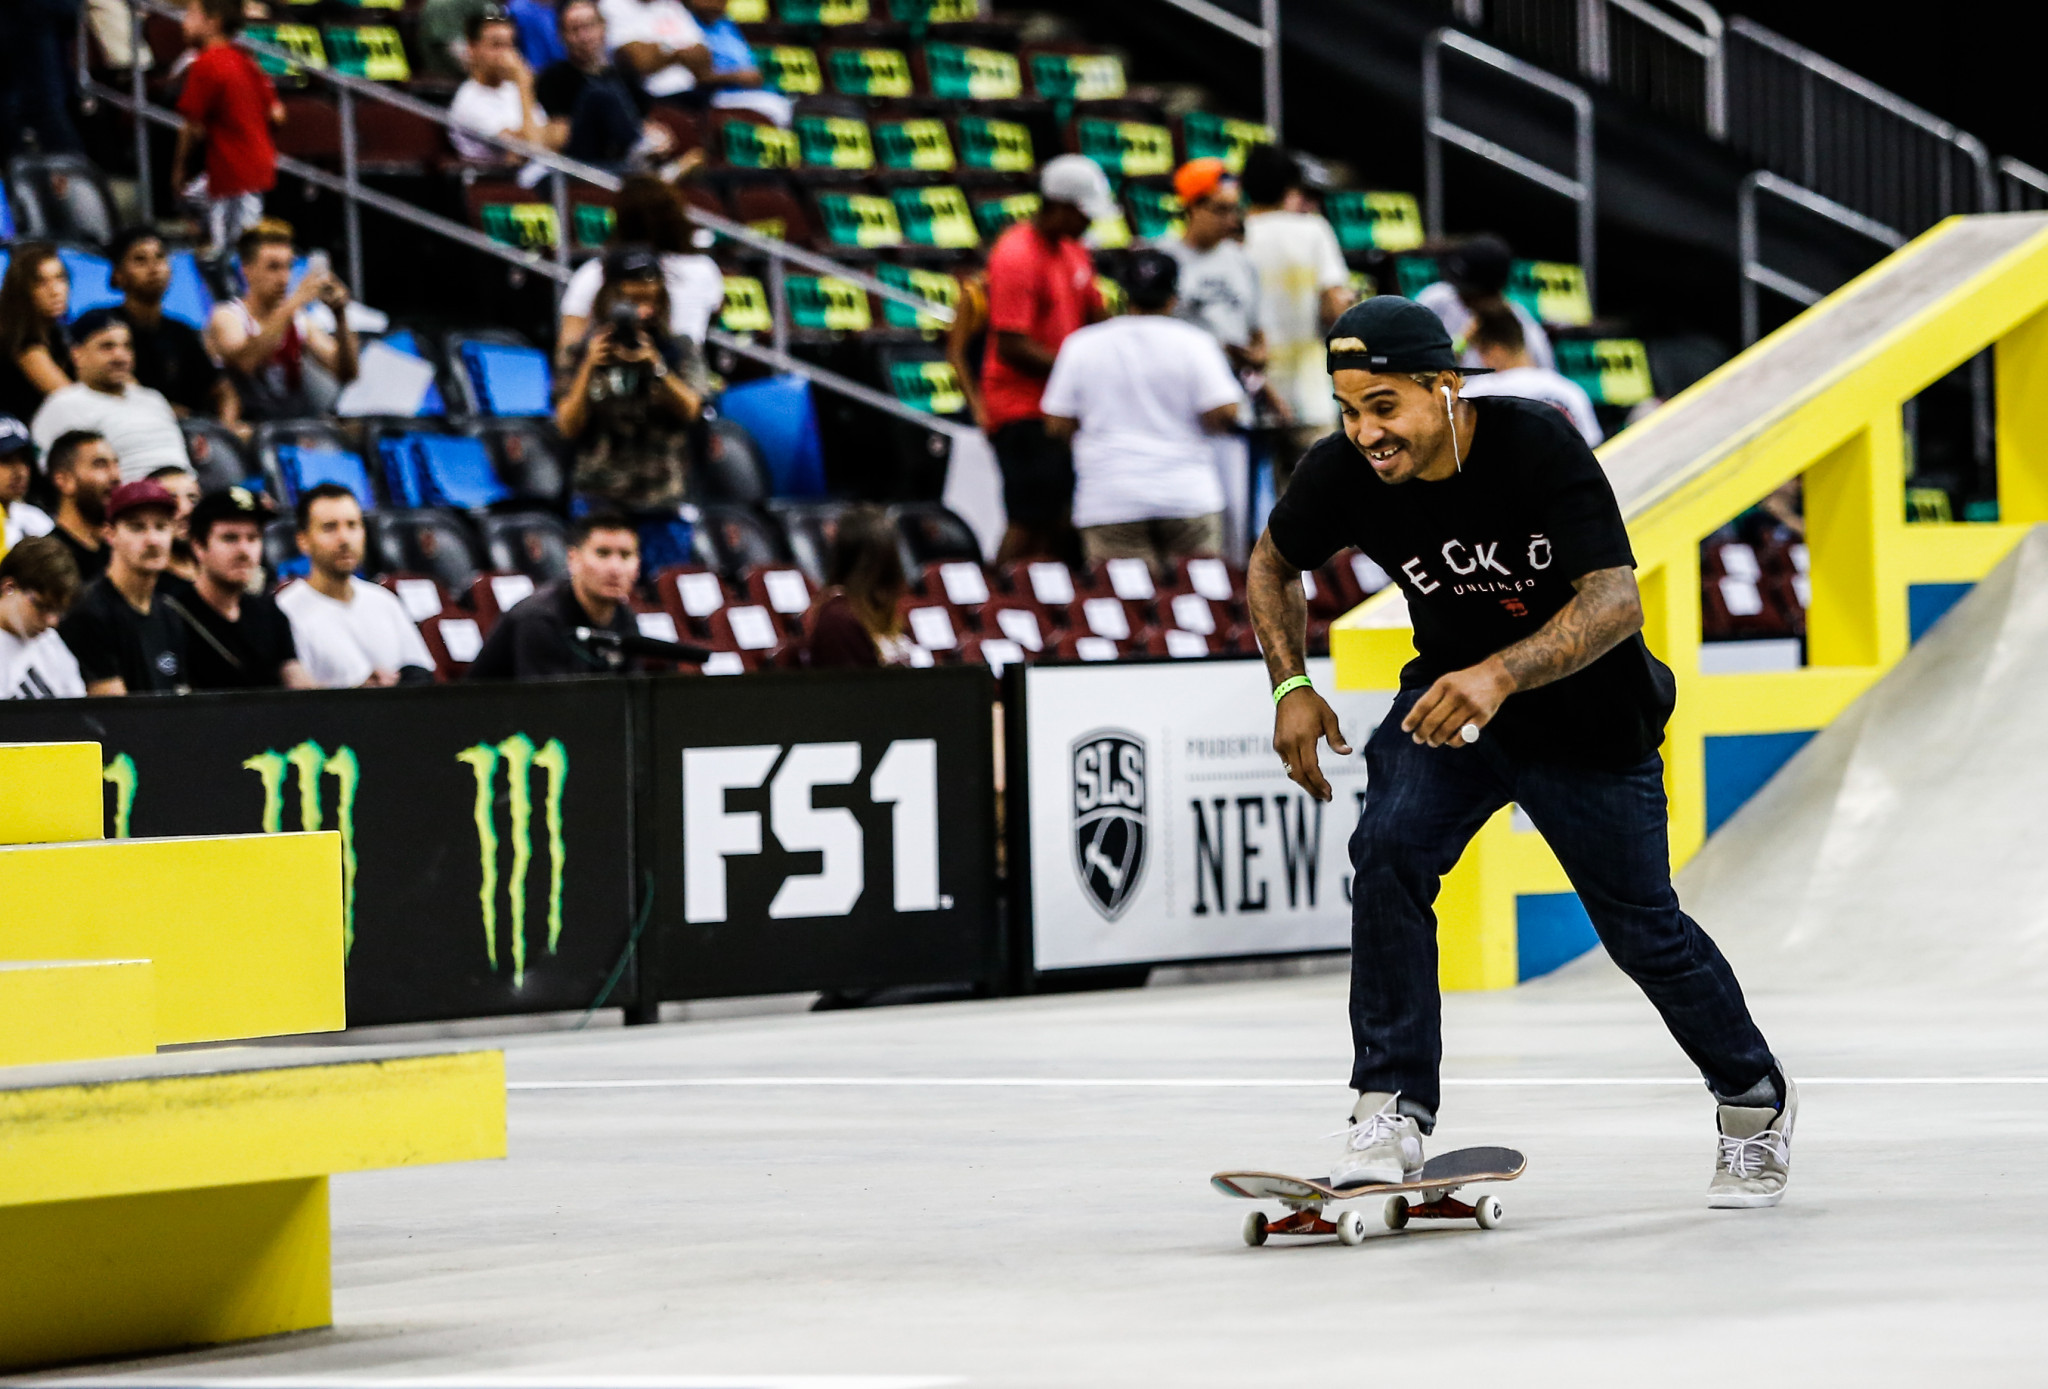 Manny Santiago won the pro street skateboarding final at the FISE Battle of the Champions in Saudi Arabia ©Getty Images